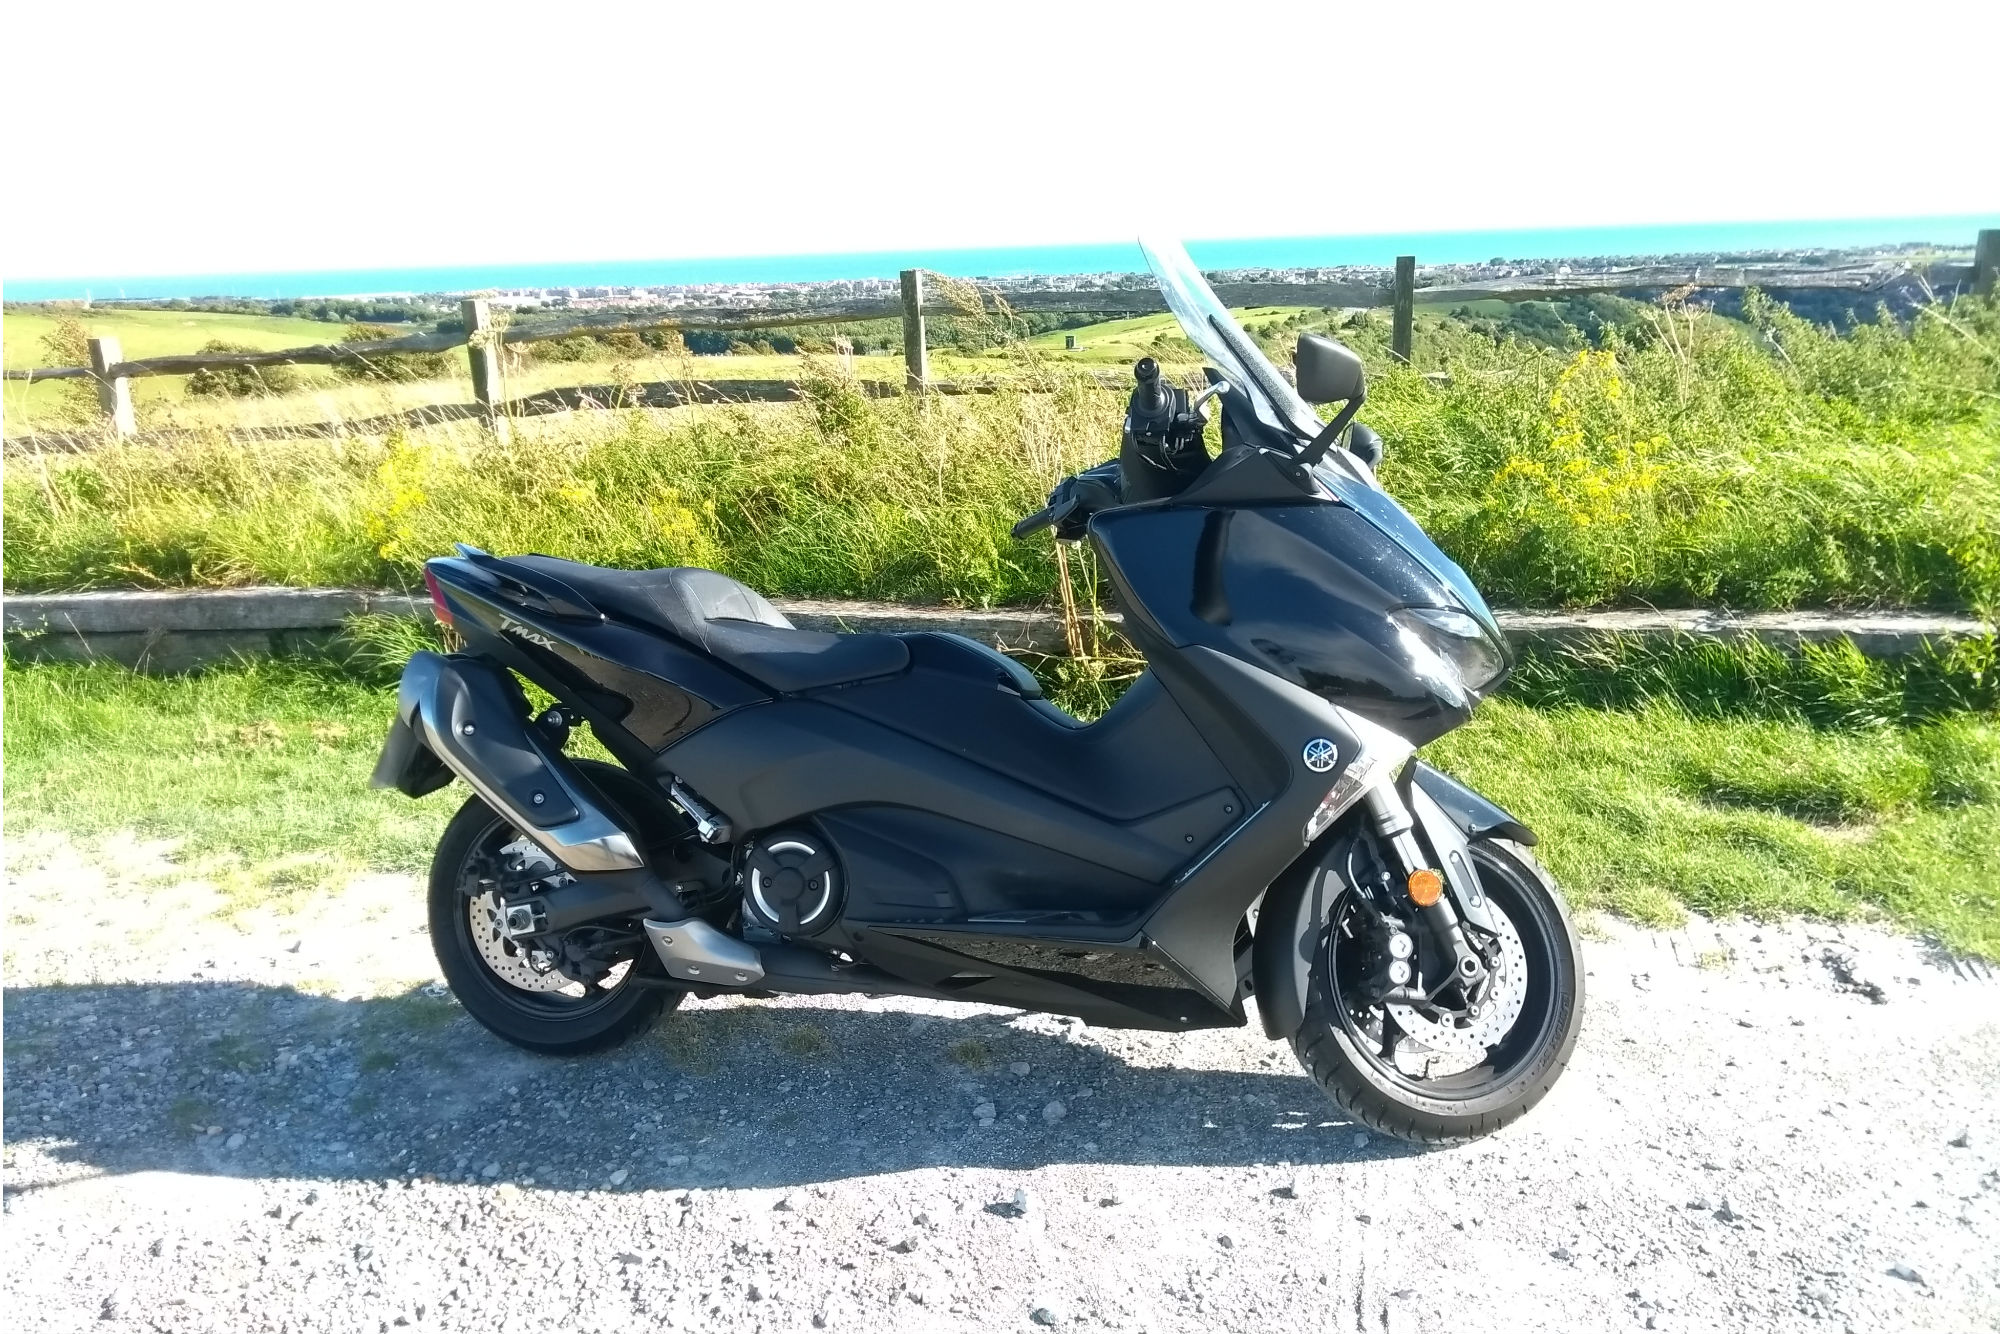 Yamaha TMAX long-term review: I thought I could ride every day through winter. Winter disagreed.